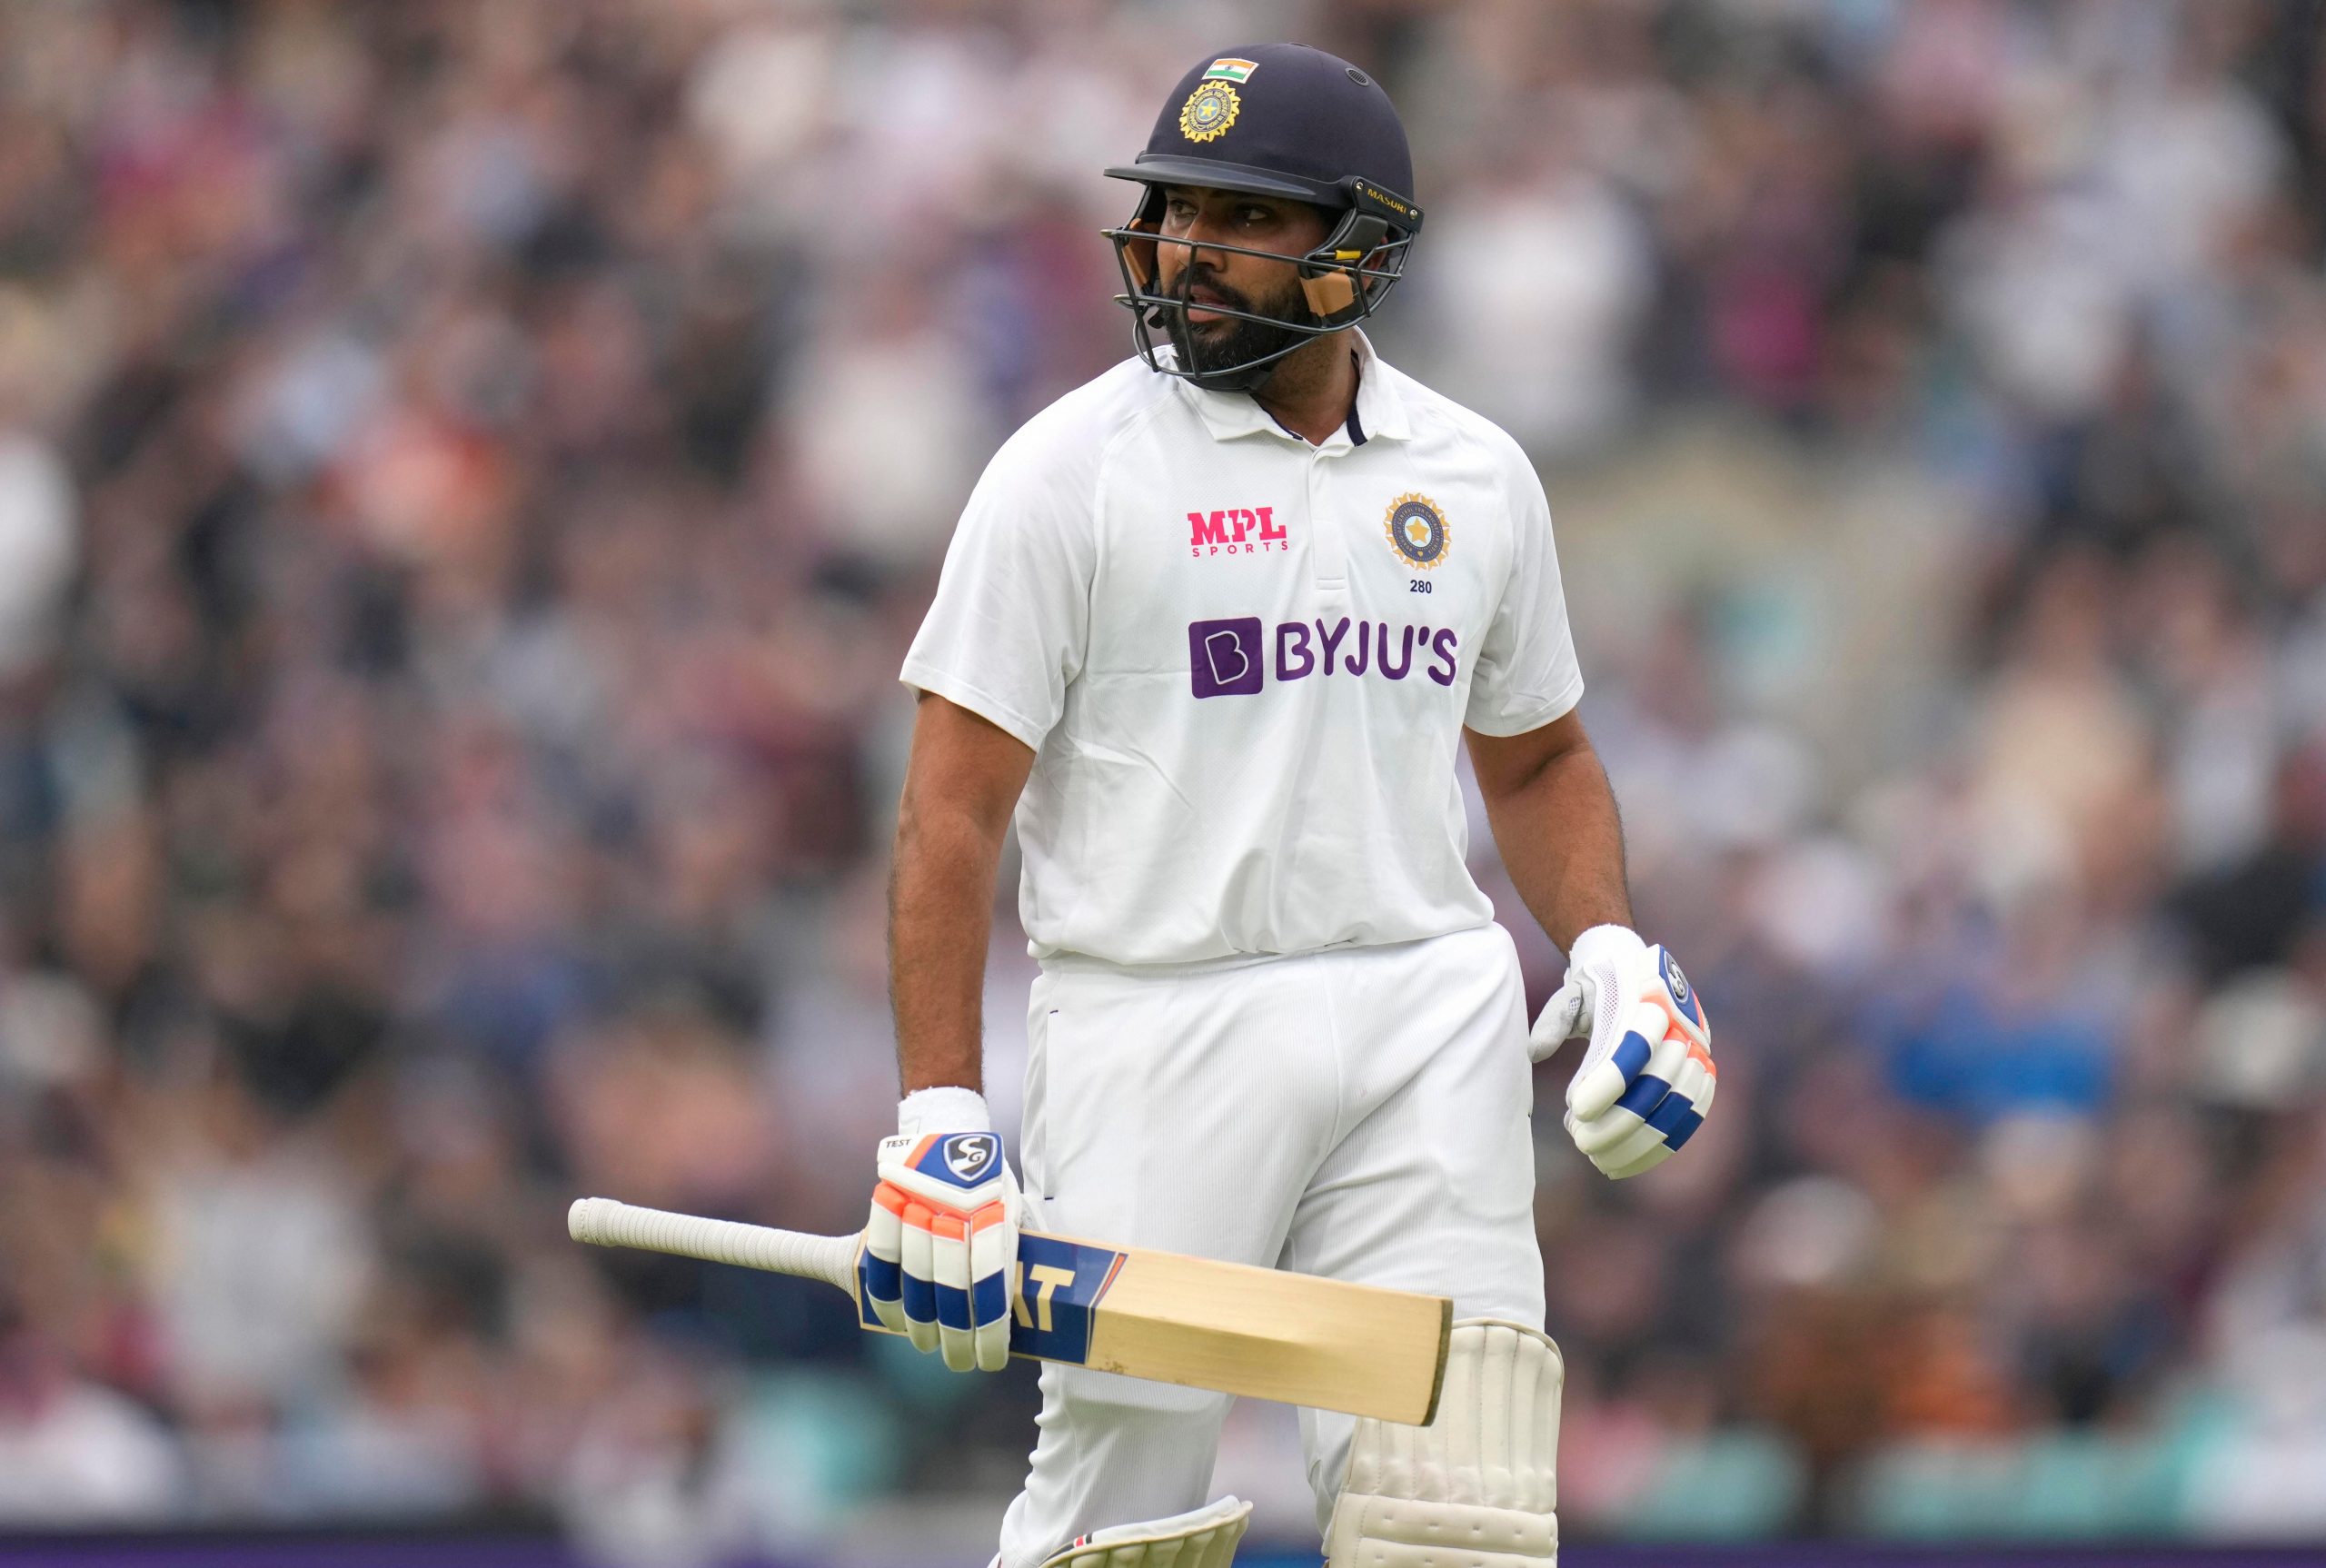 This was my last chance as opener: Rohit Sharma after Oval Test hundred